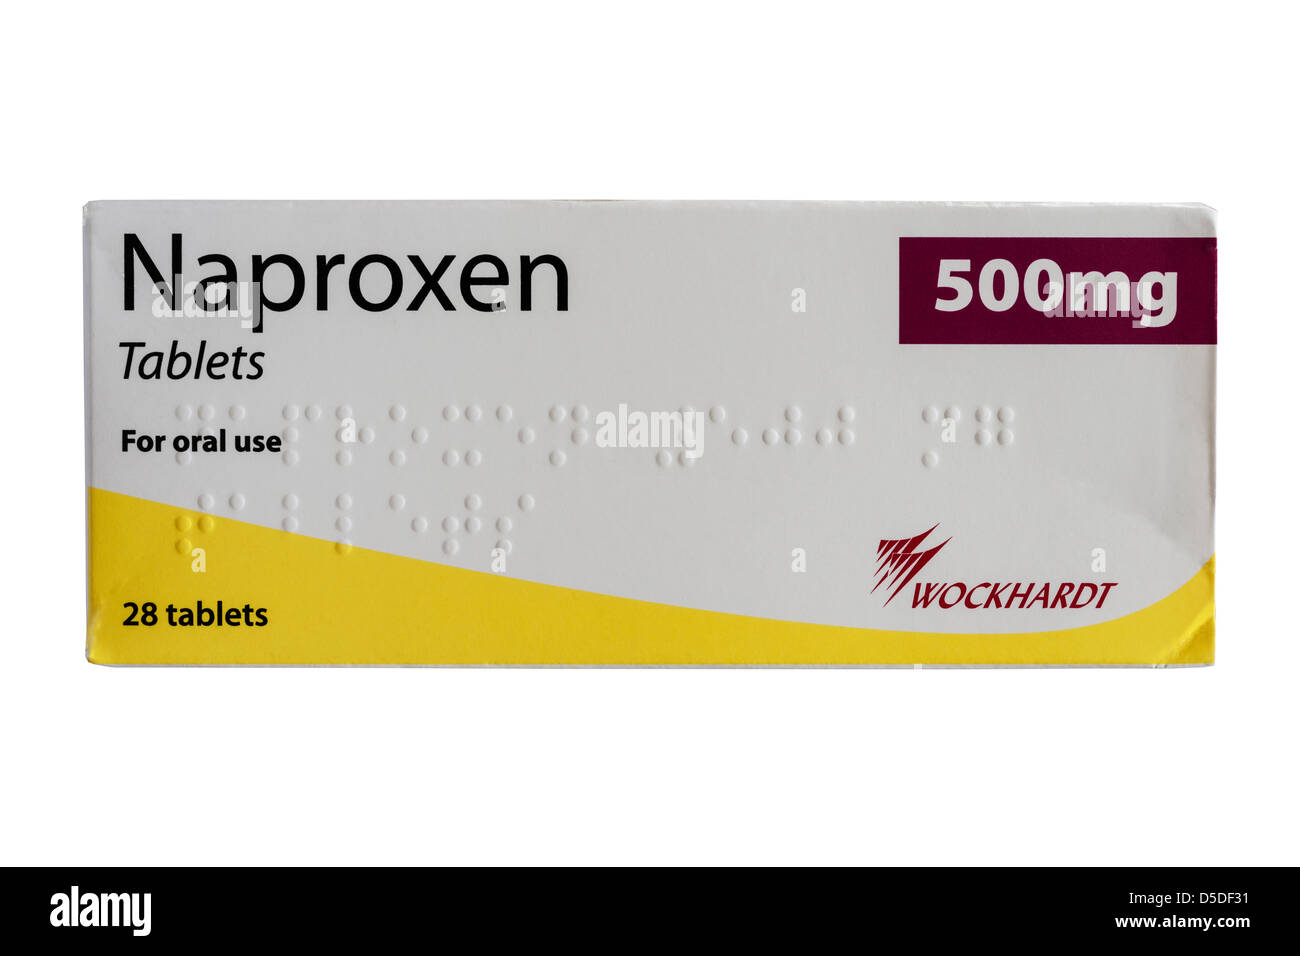 A box of Naproxen 500mg tablets for pain relief and reducing inflammation Stock Photo